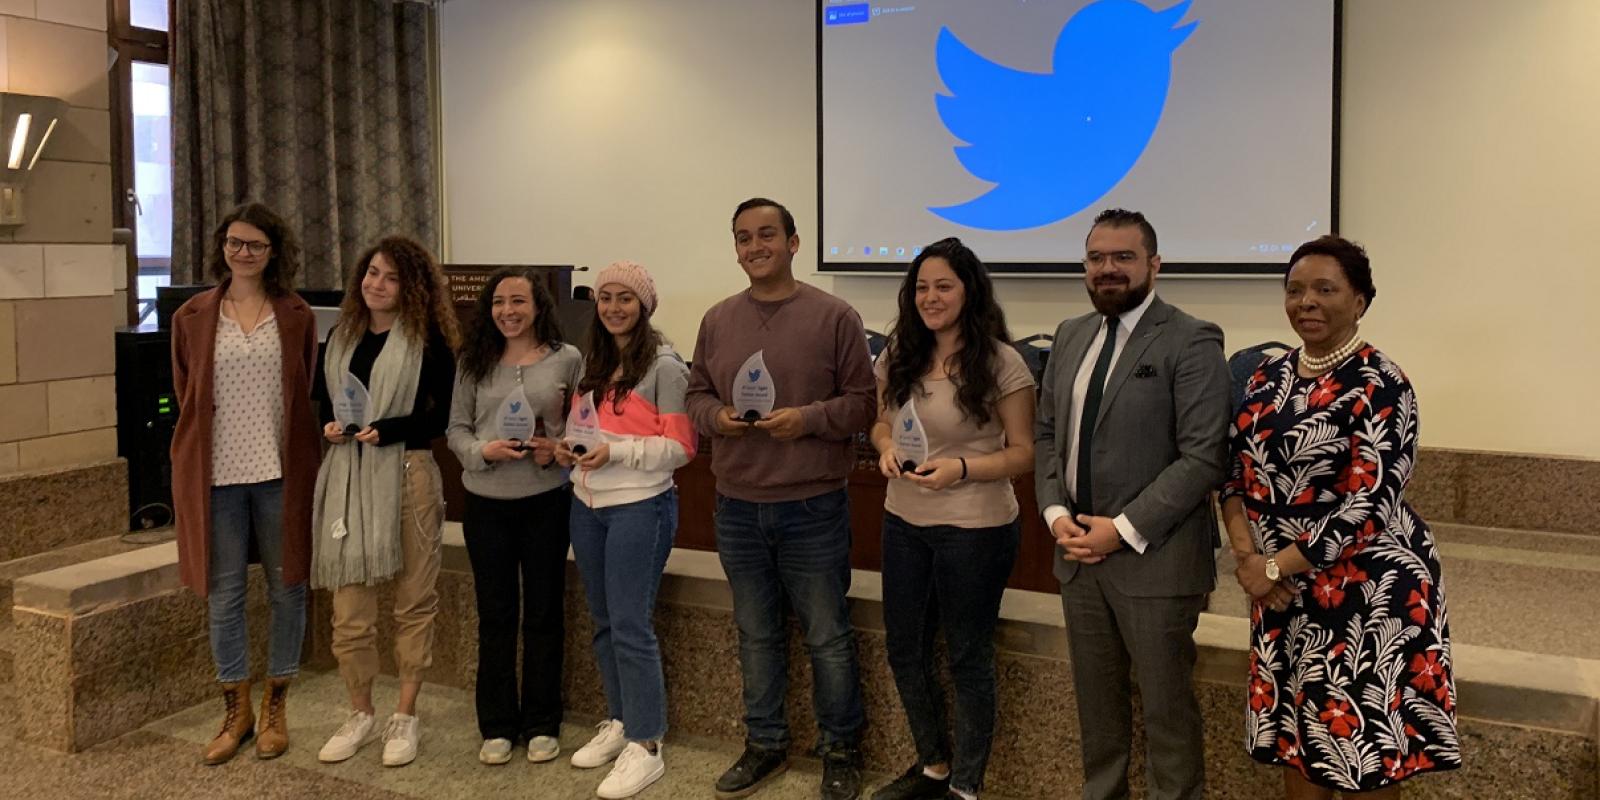 AUC Announces #Tweetright Competition Winners